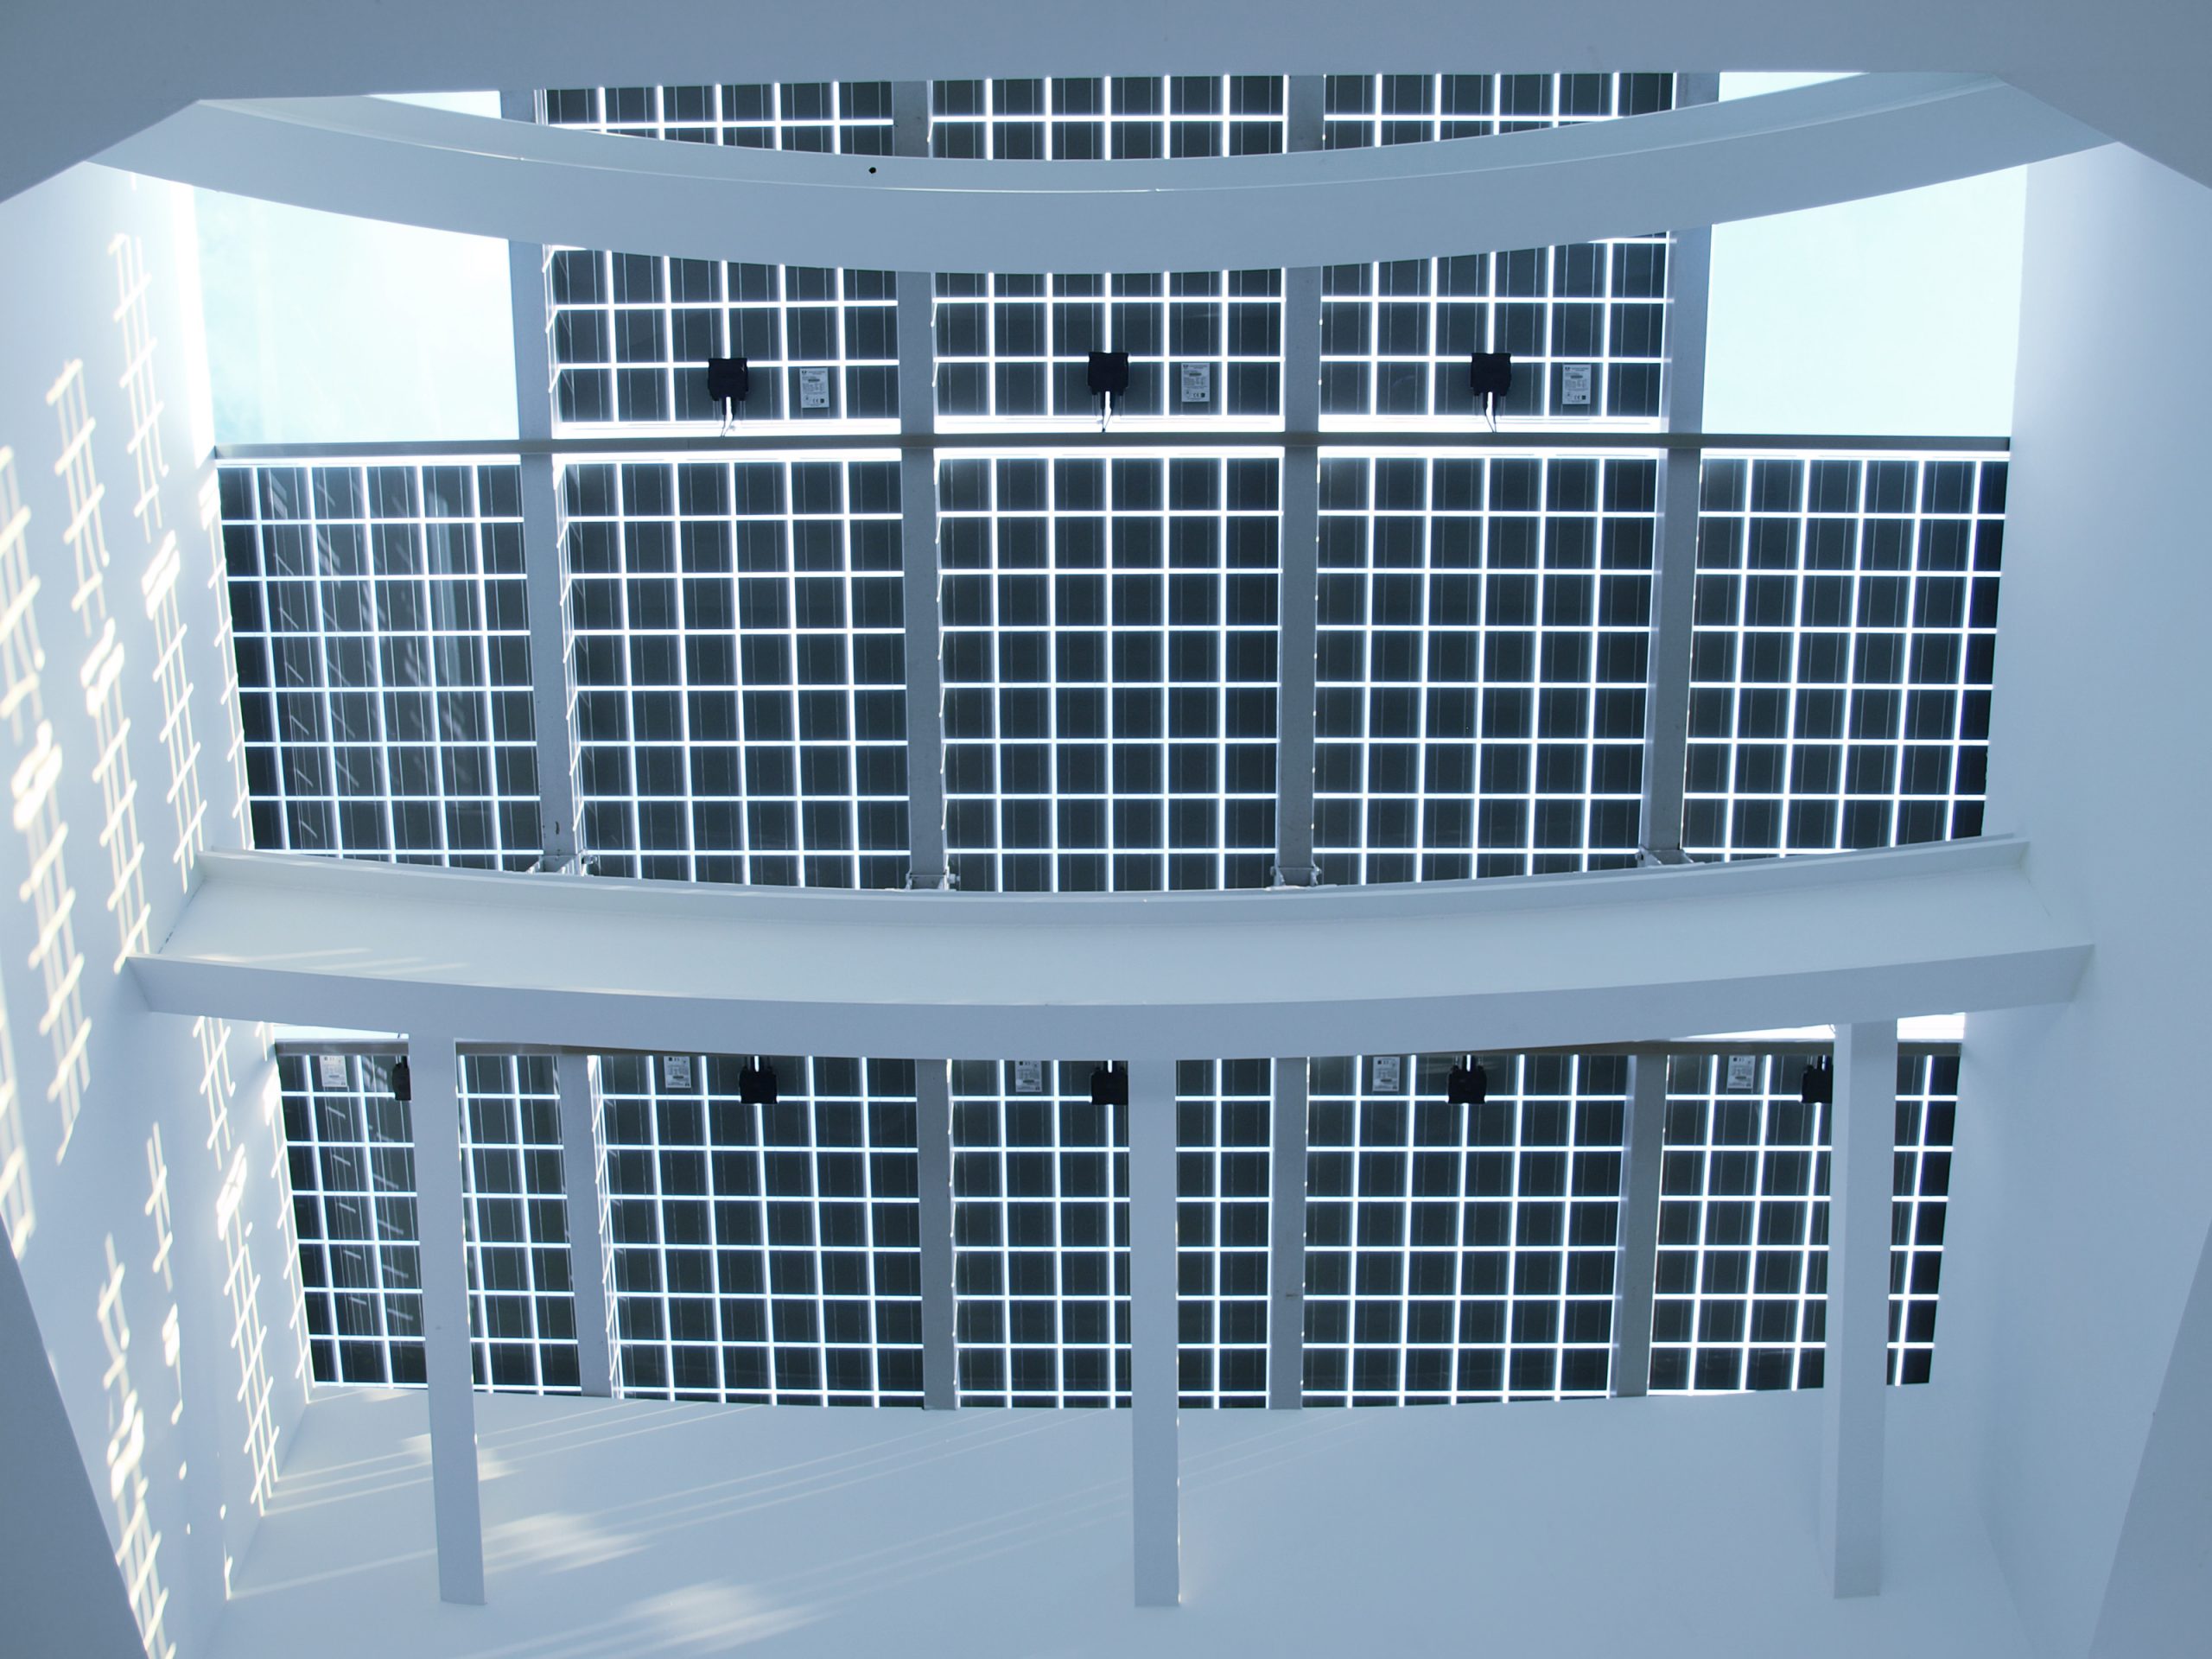 Ceiling made by solar power panel